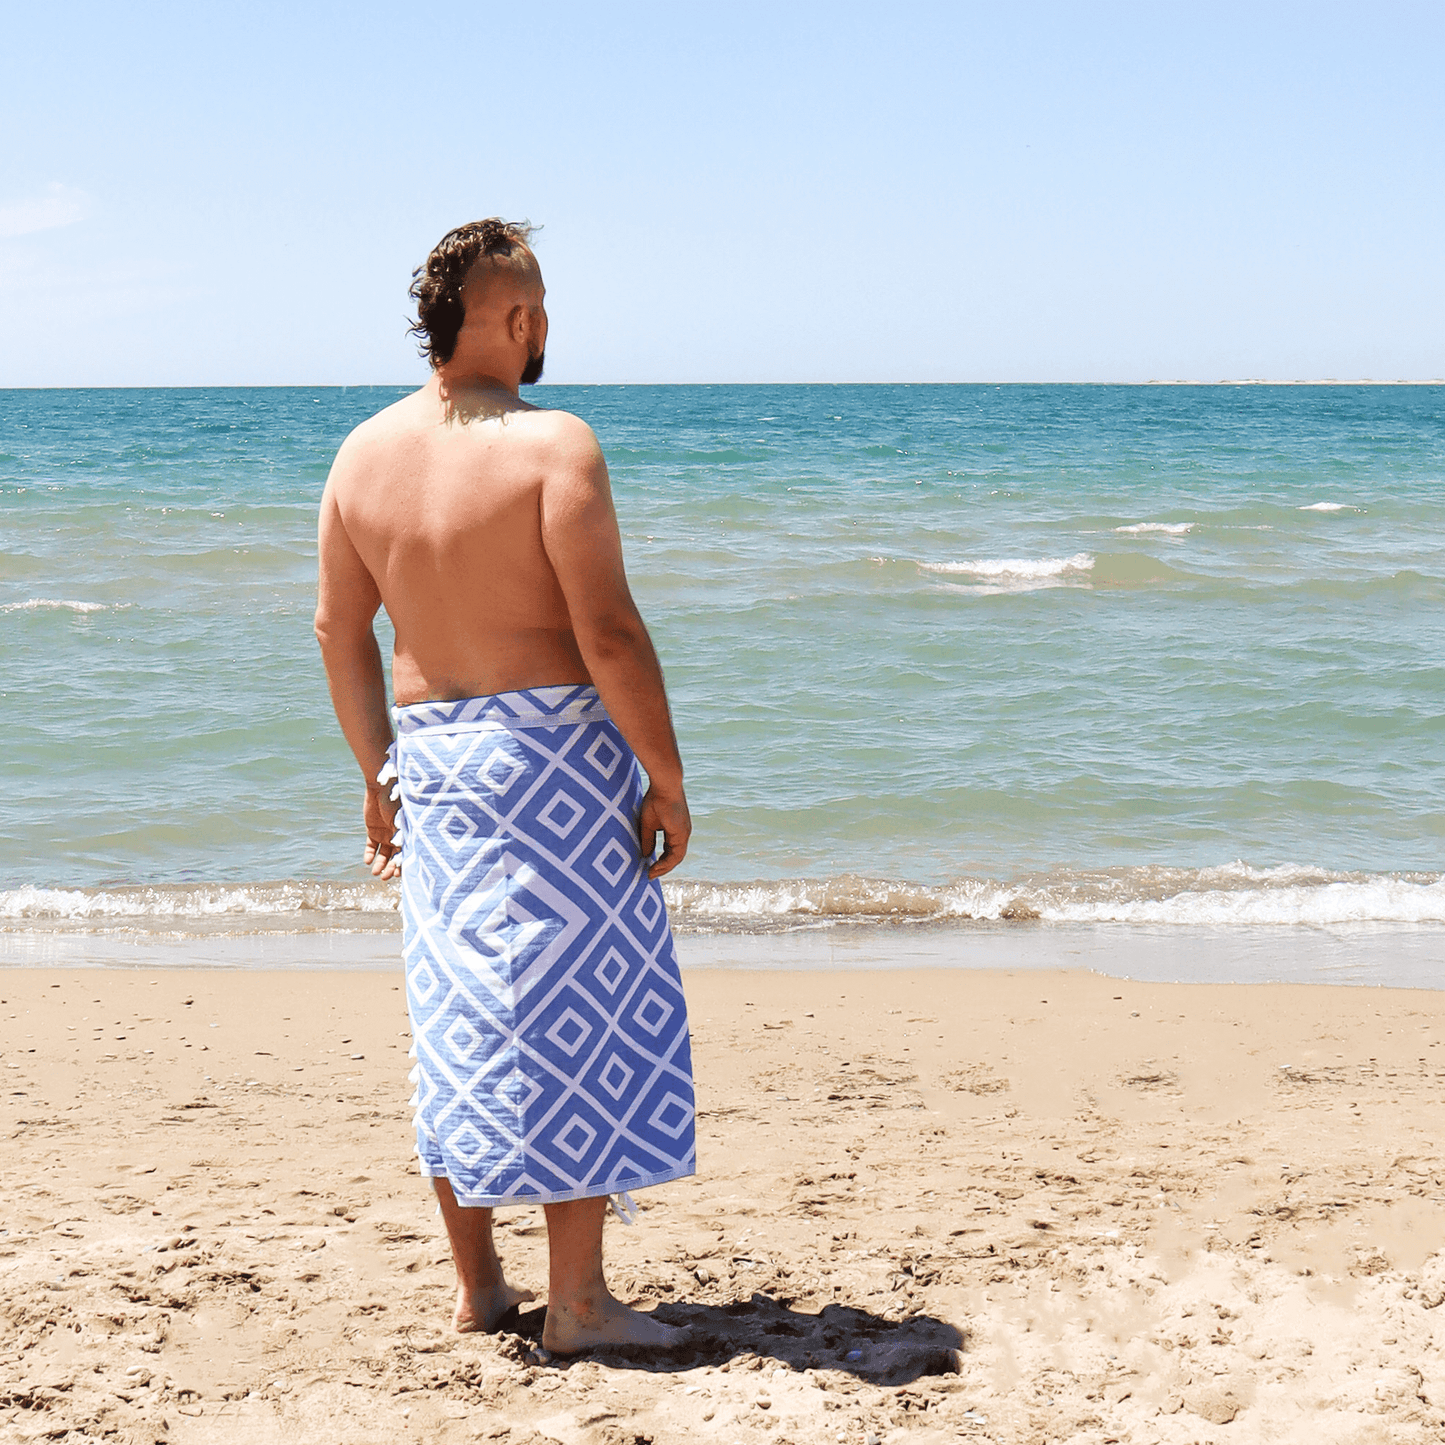 Man stands on beach in summer wearing a blue and white Turkish Towel